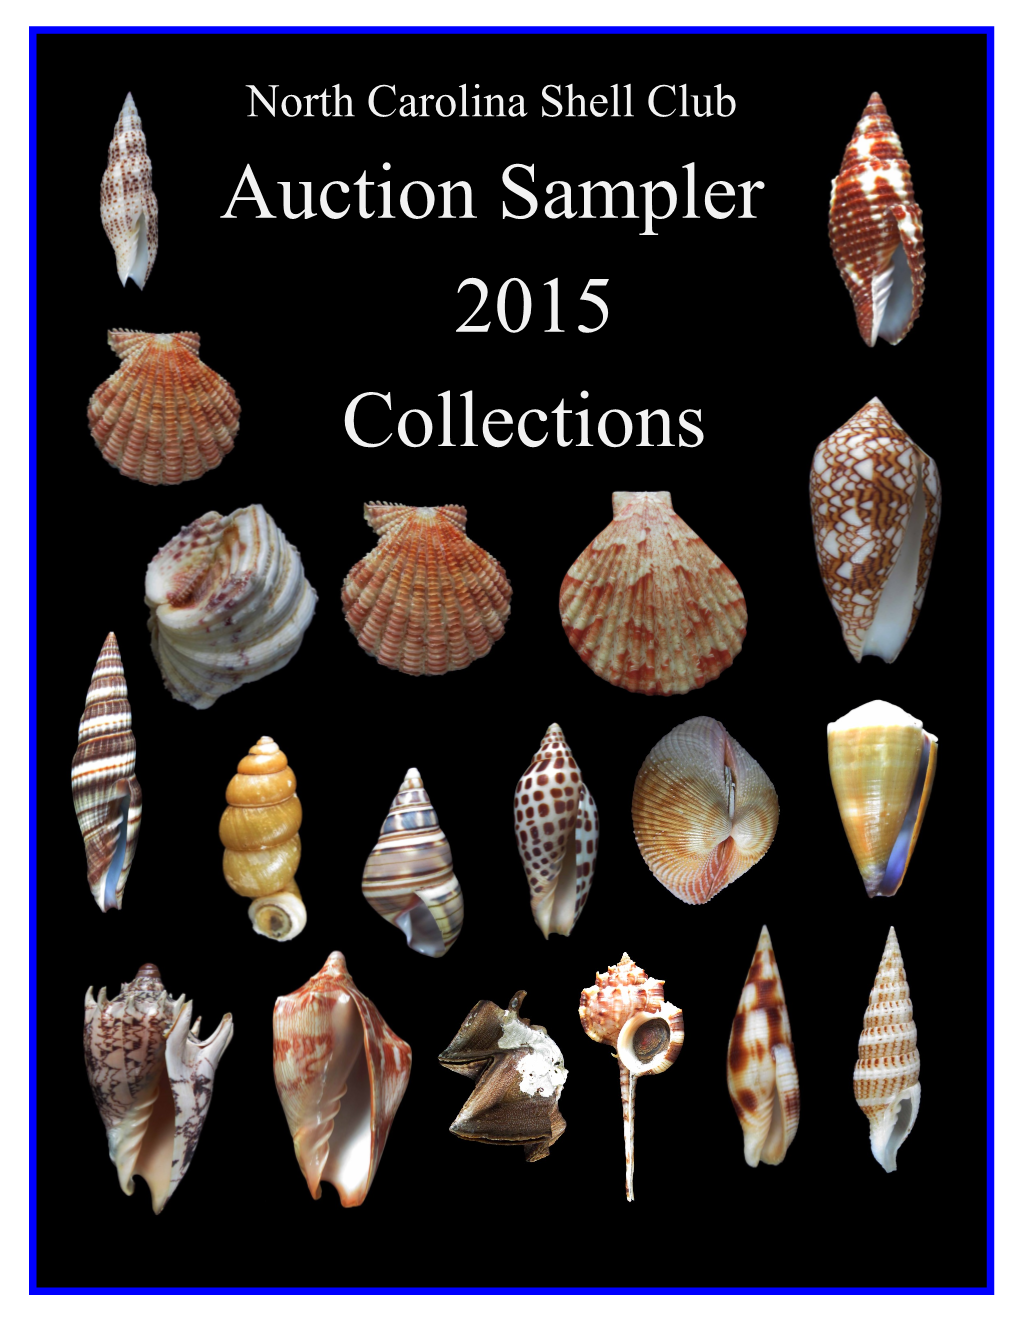 Auction Sampler 2015 Collections North Carolina Shell Club Auction Sampler